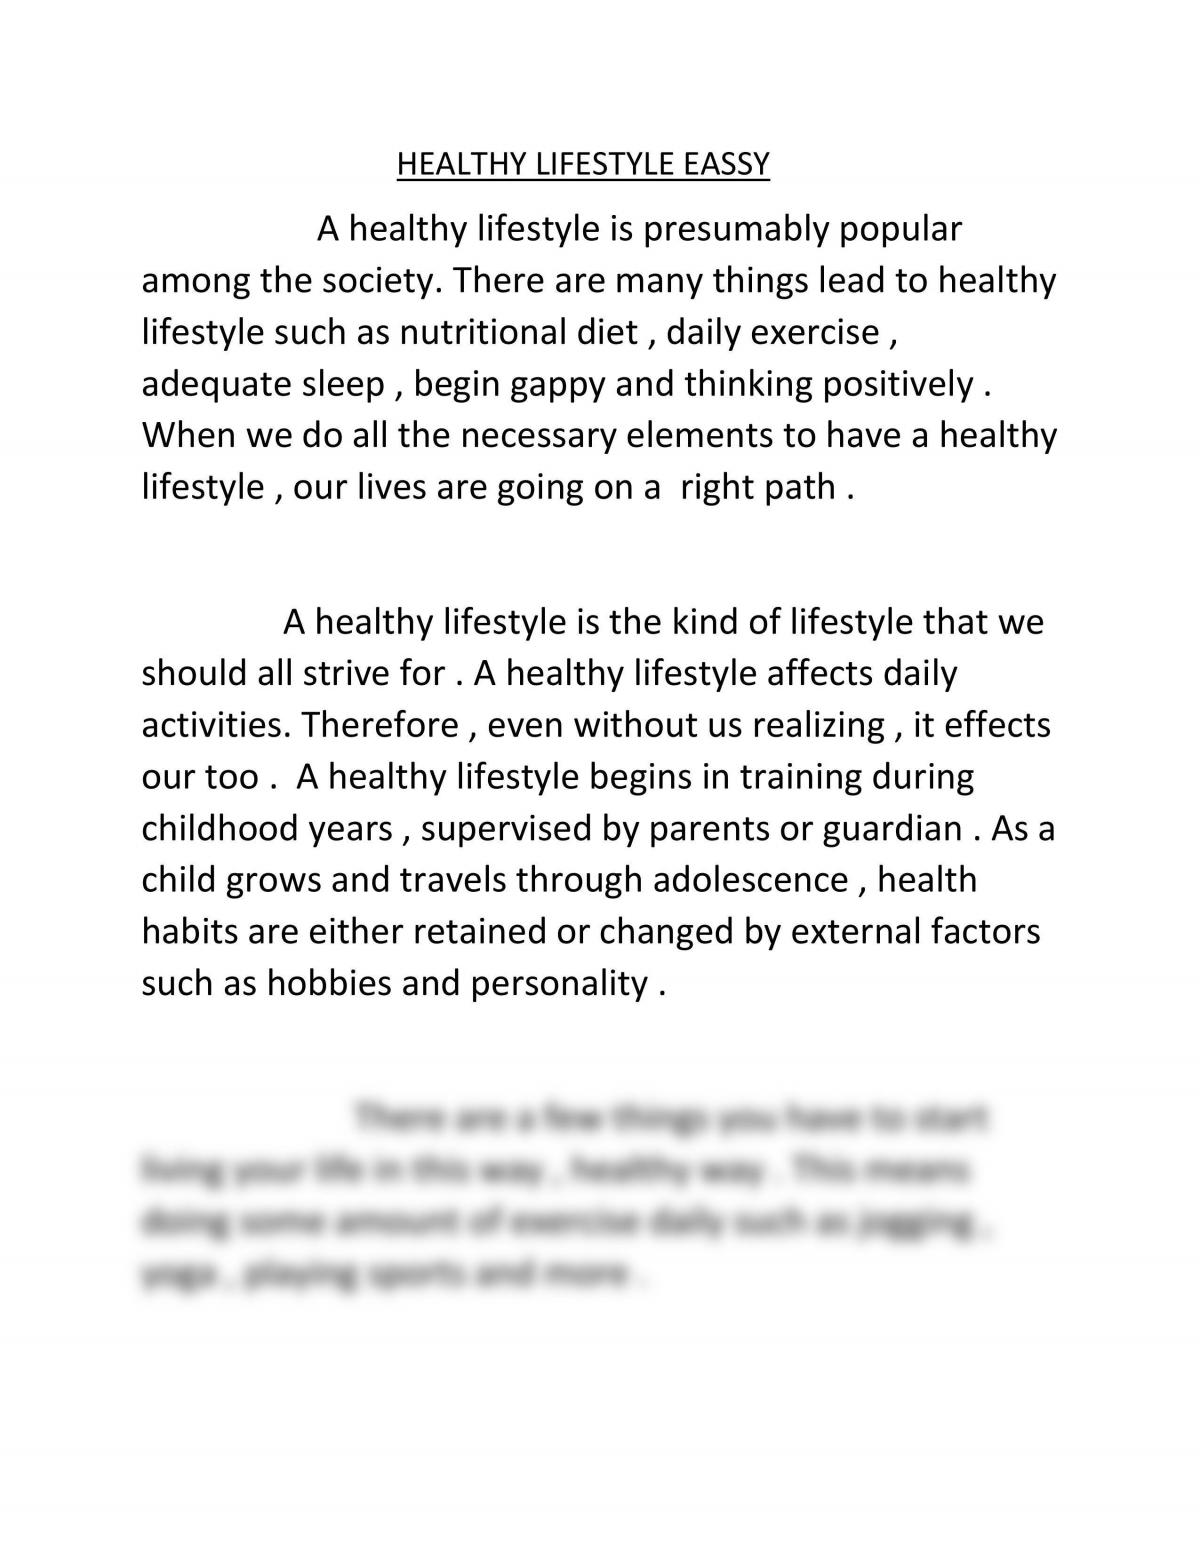 importance of healthy lifestyle essay spm